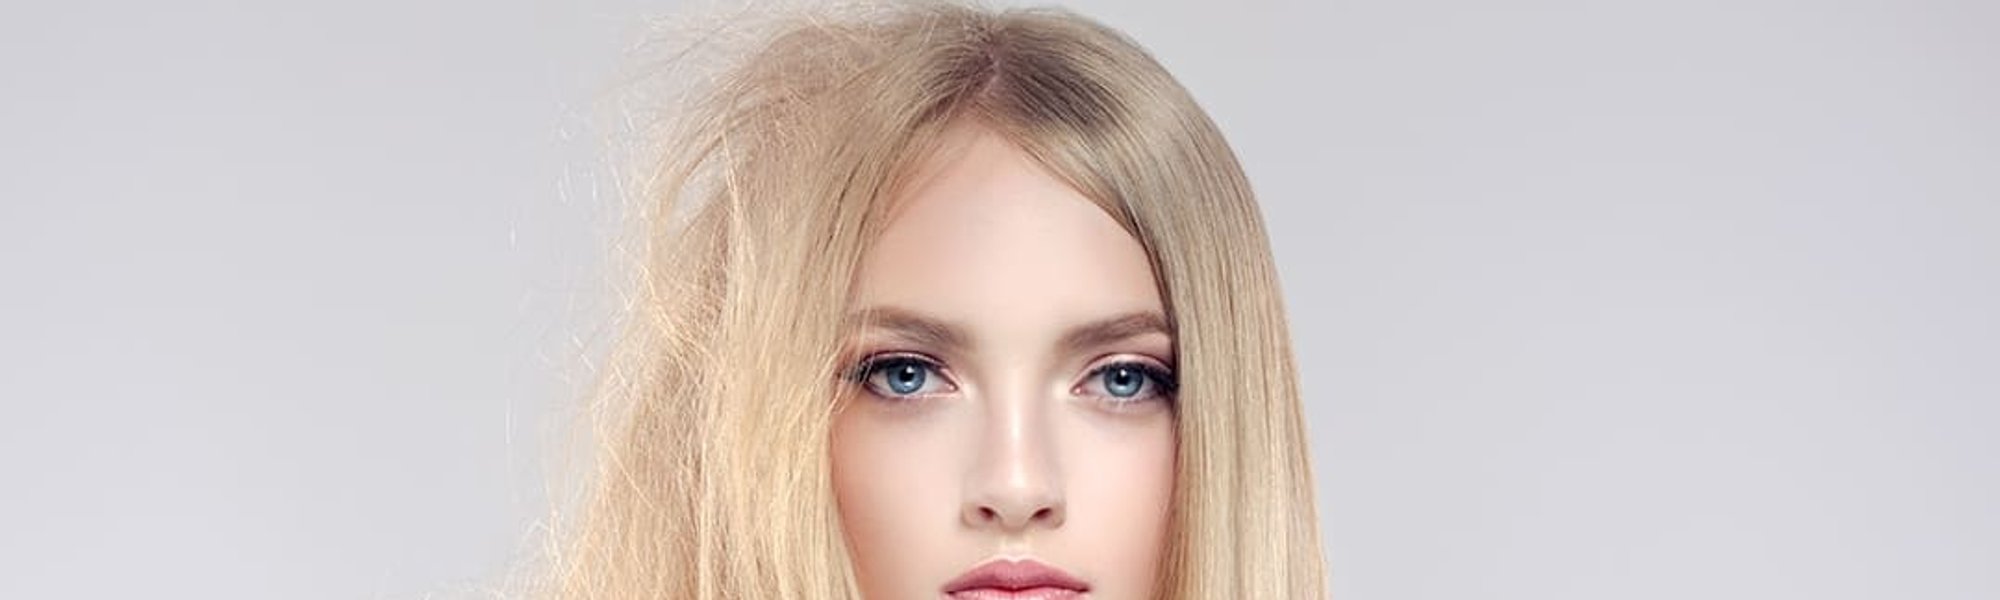 Banish Frizz How To Banish Frizzy Hair For Good 1080x476